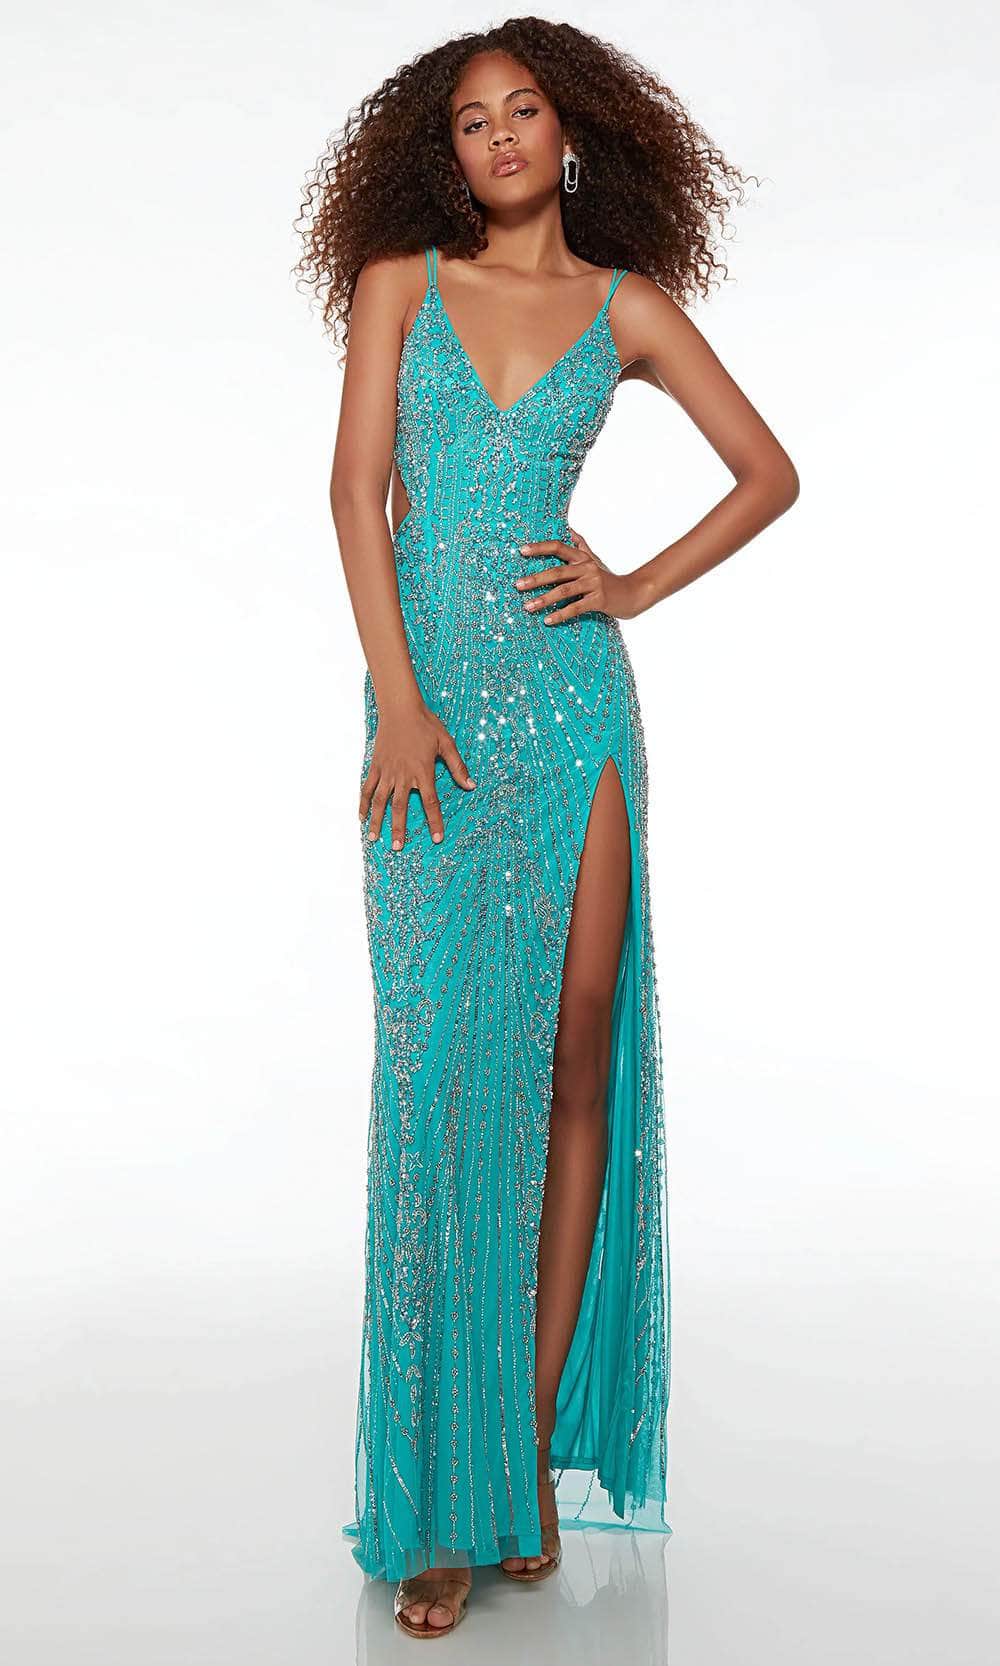 Alyce Paris 61585 - Strappy Back Sheath Prom Gown Special Occasion Dress 000 / Caribbean-Silver